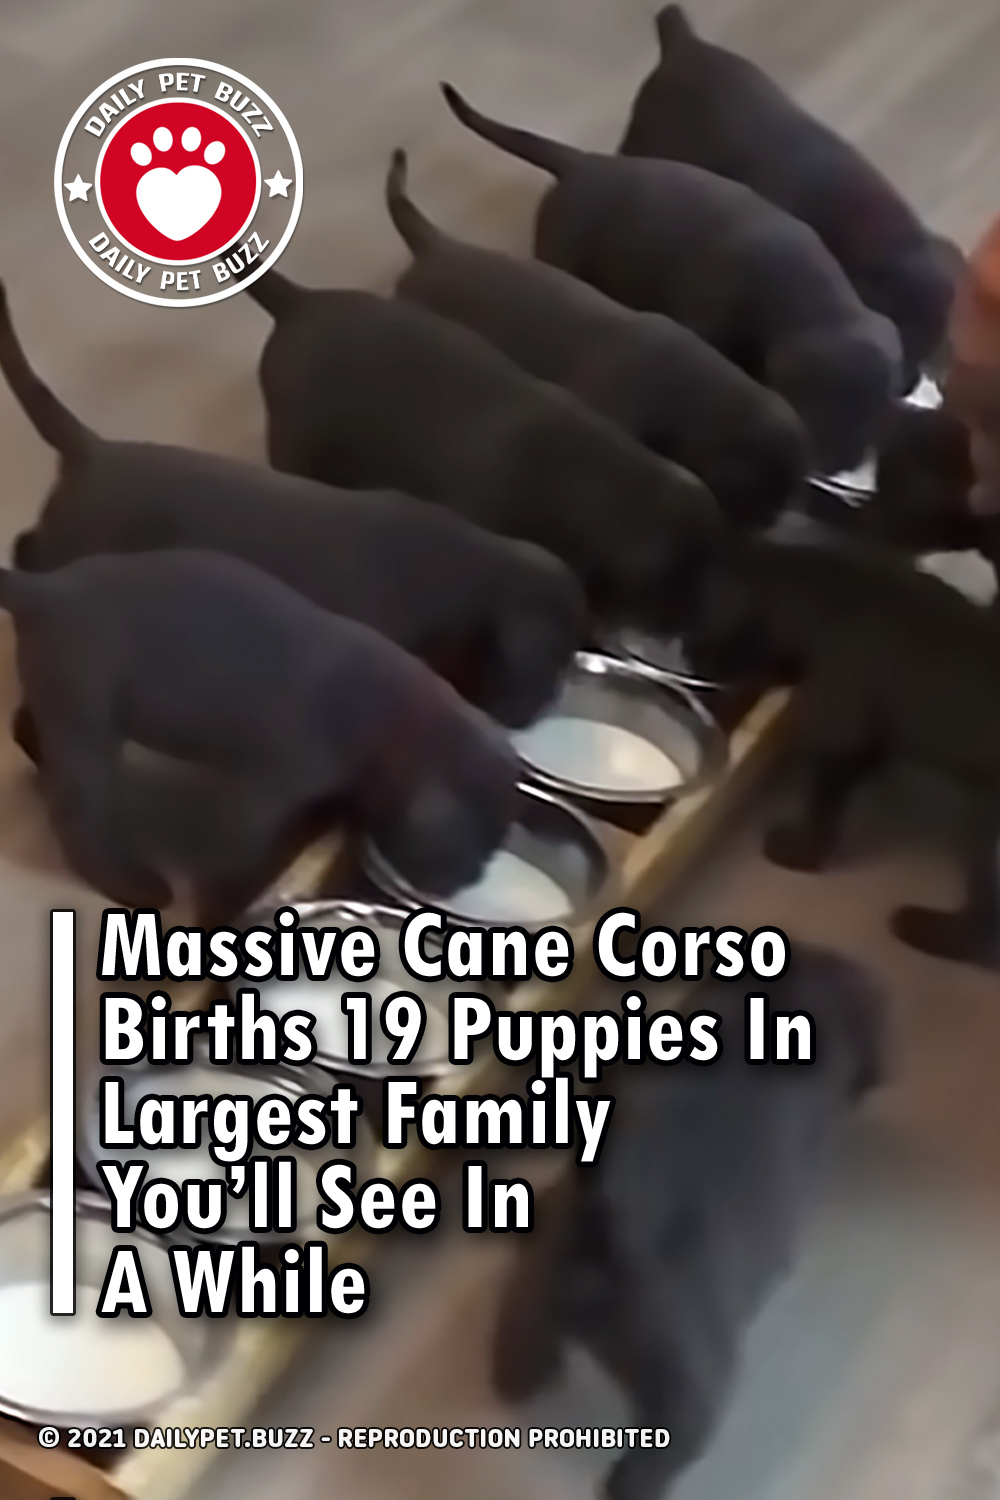 Massive Cane Corso Births 19 Puppies In Largest Family You\'ll See In A While